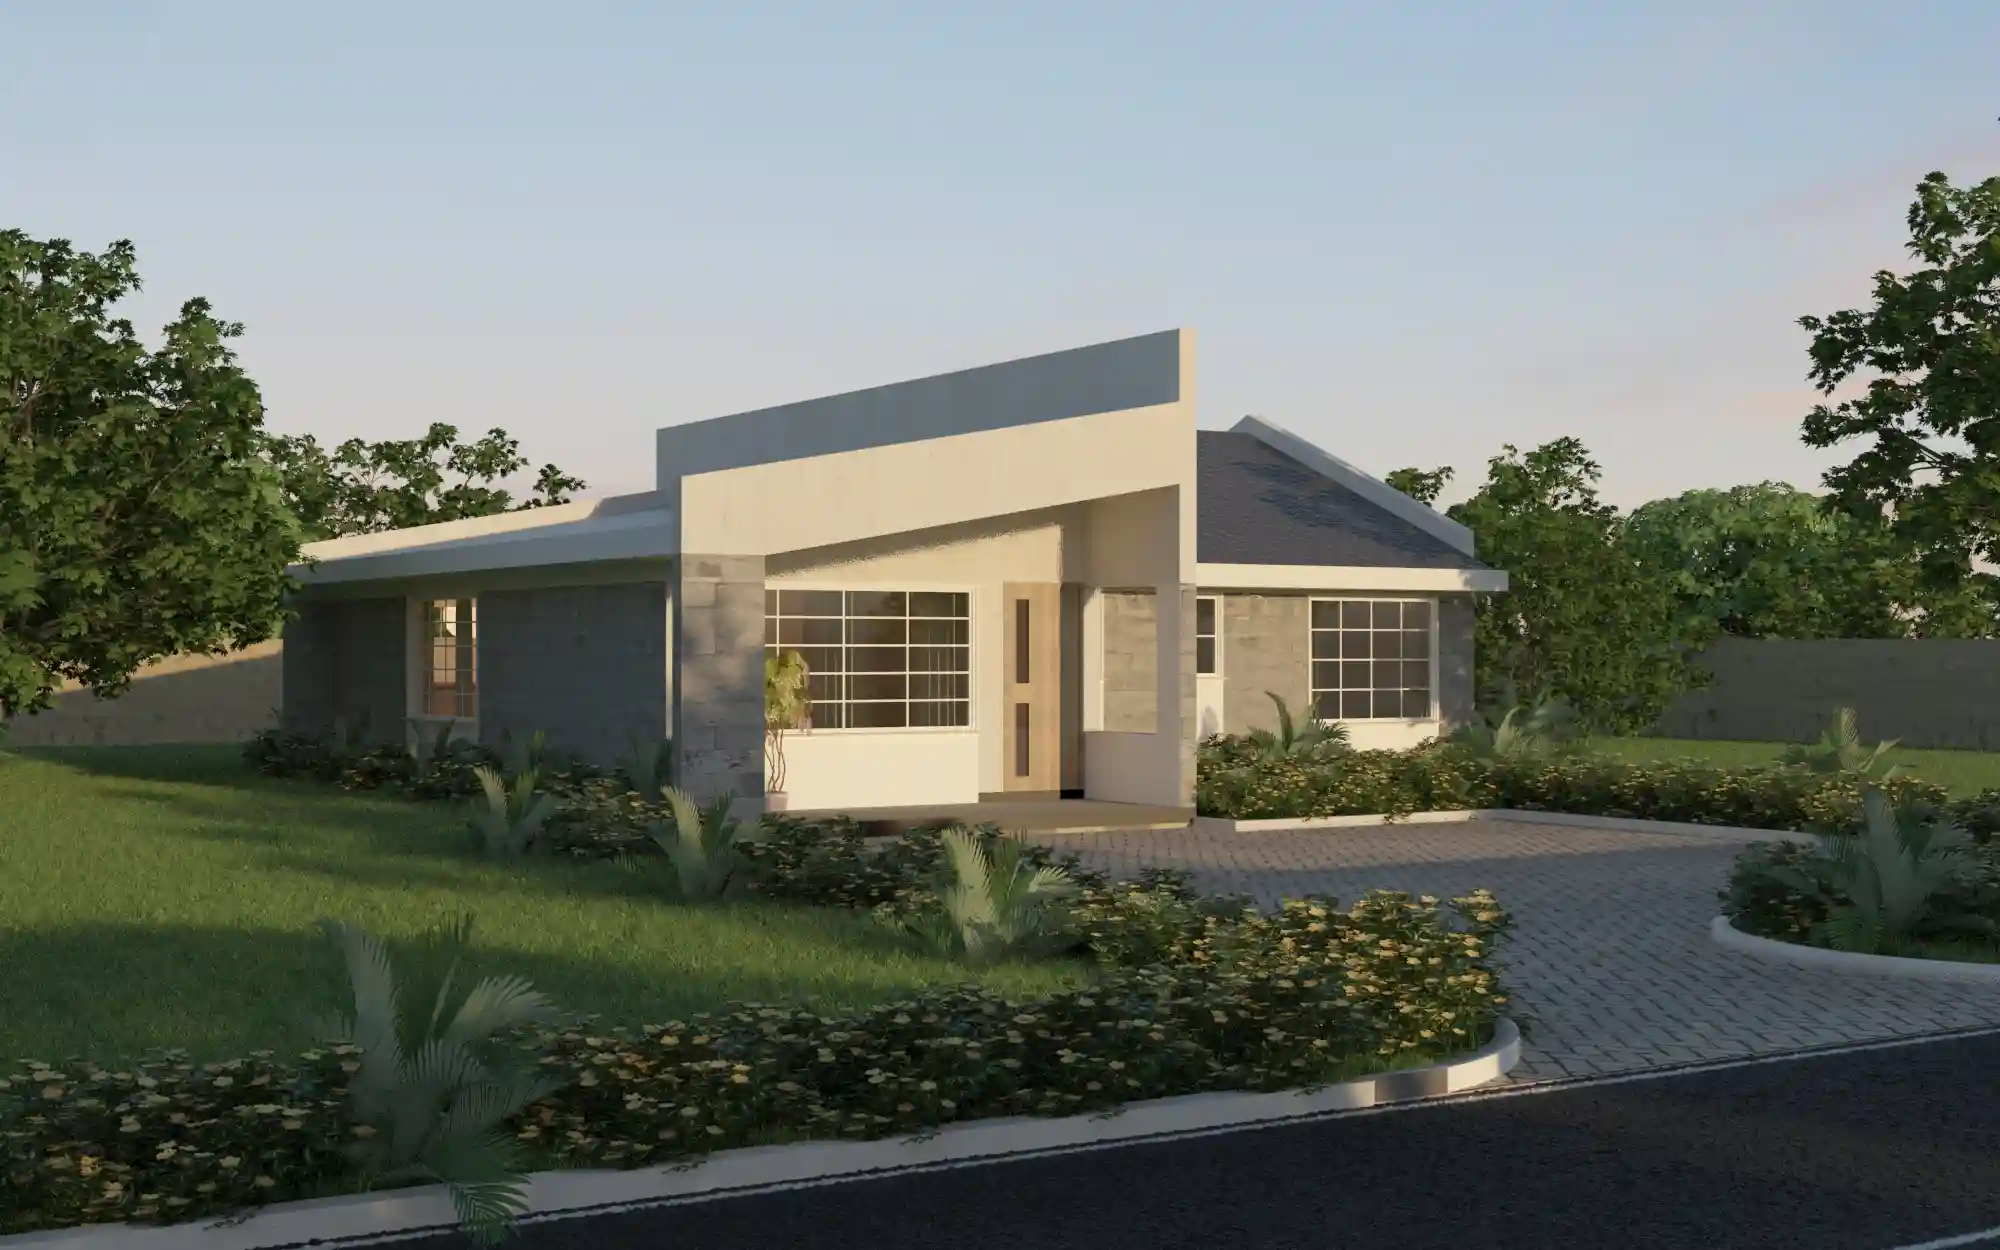 3 Bedroom Bungalow -ID 3143 - 3 BED BNGL TP4 OP3 FRONT.jpg from Inuua Tujenge house plans with 3 bedrooms and 2 bathrooms. ( bungalow )